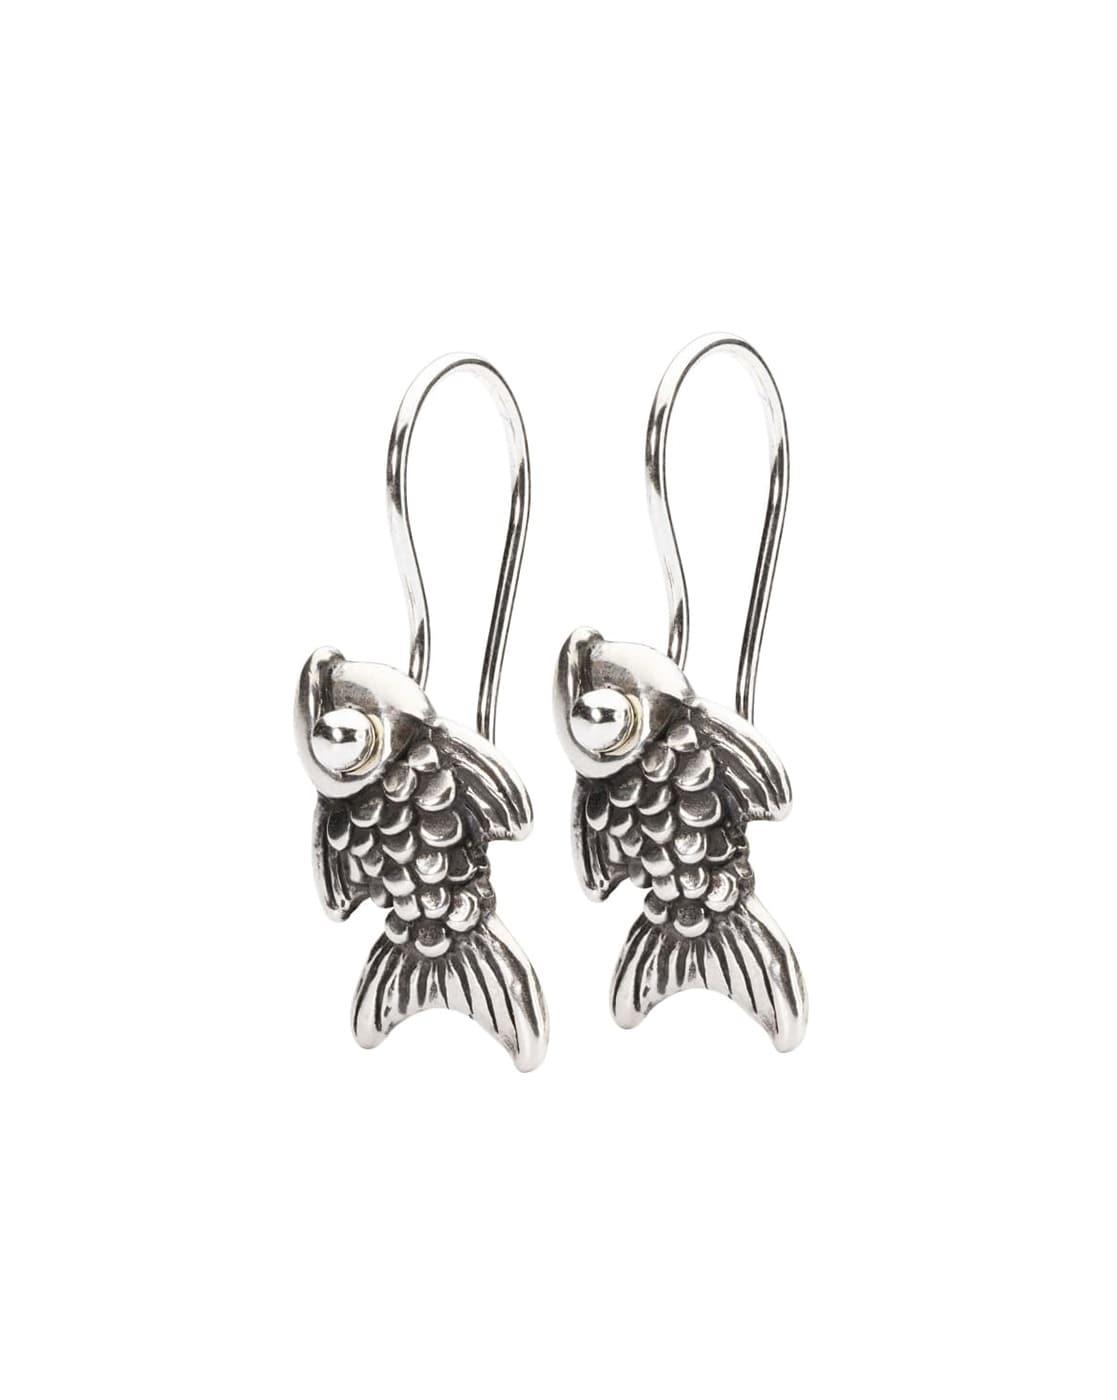 Buy Fish Earrings, Sterling Silver, Fish Jewellery, Handmade, Silver Fish,  Hammered Silver, Fishing Jewellery, Drop Earrings, Animal Jewellery, Online  in India - Etsy